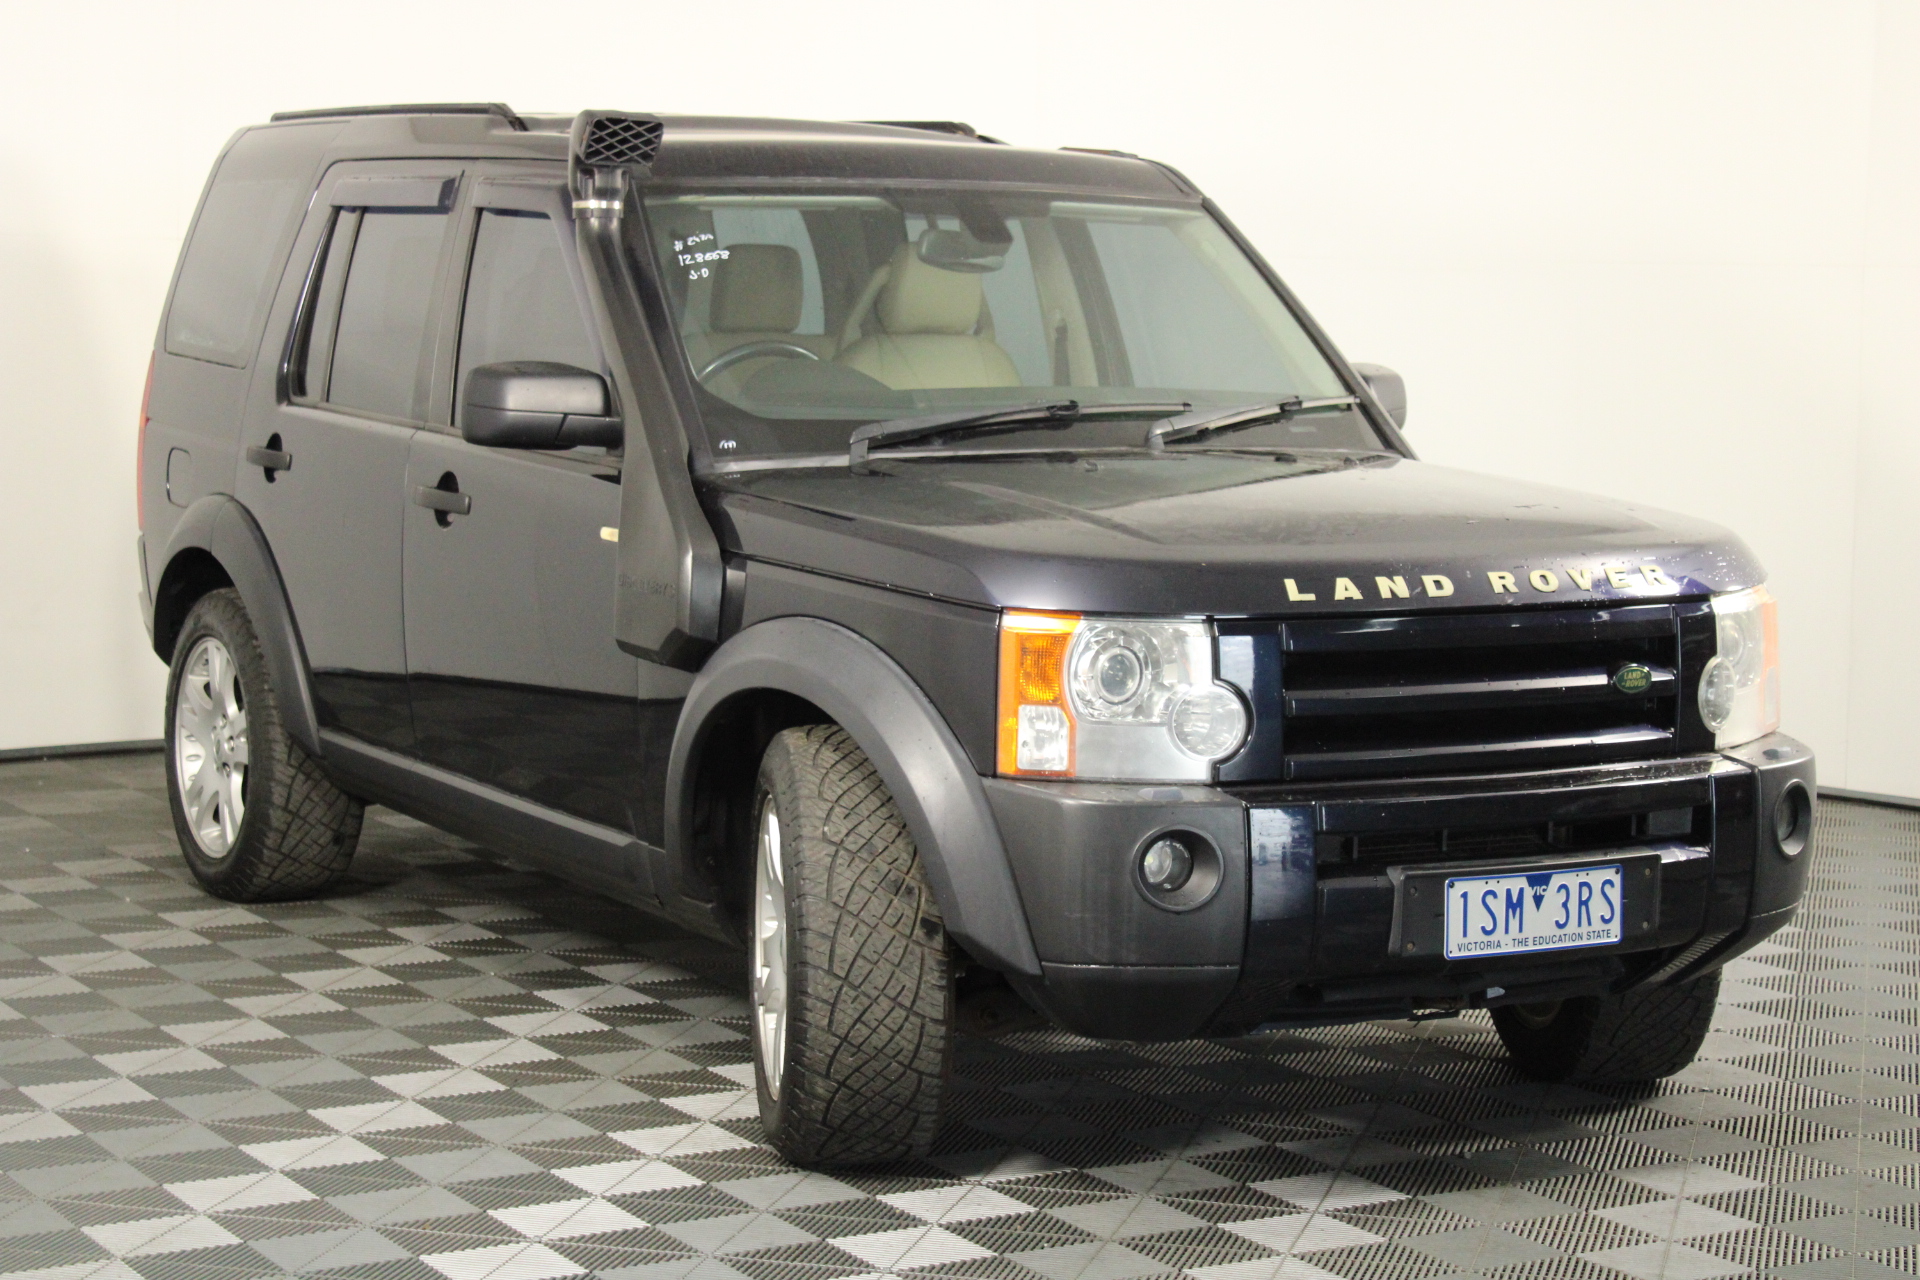 2006 Land Rover Discovery 3 SE Series III Turbo Diesel